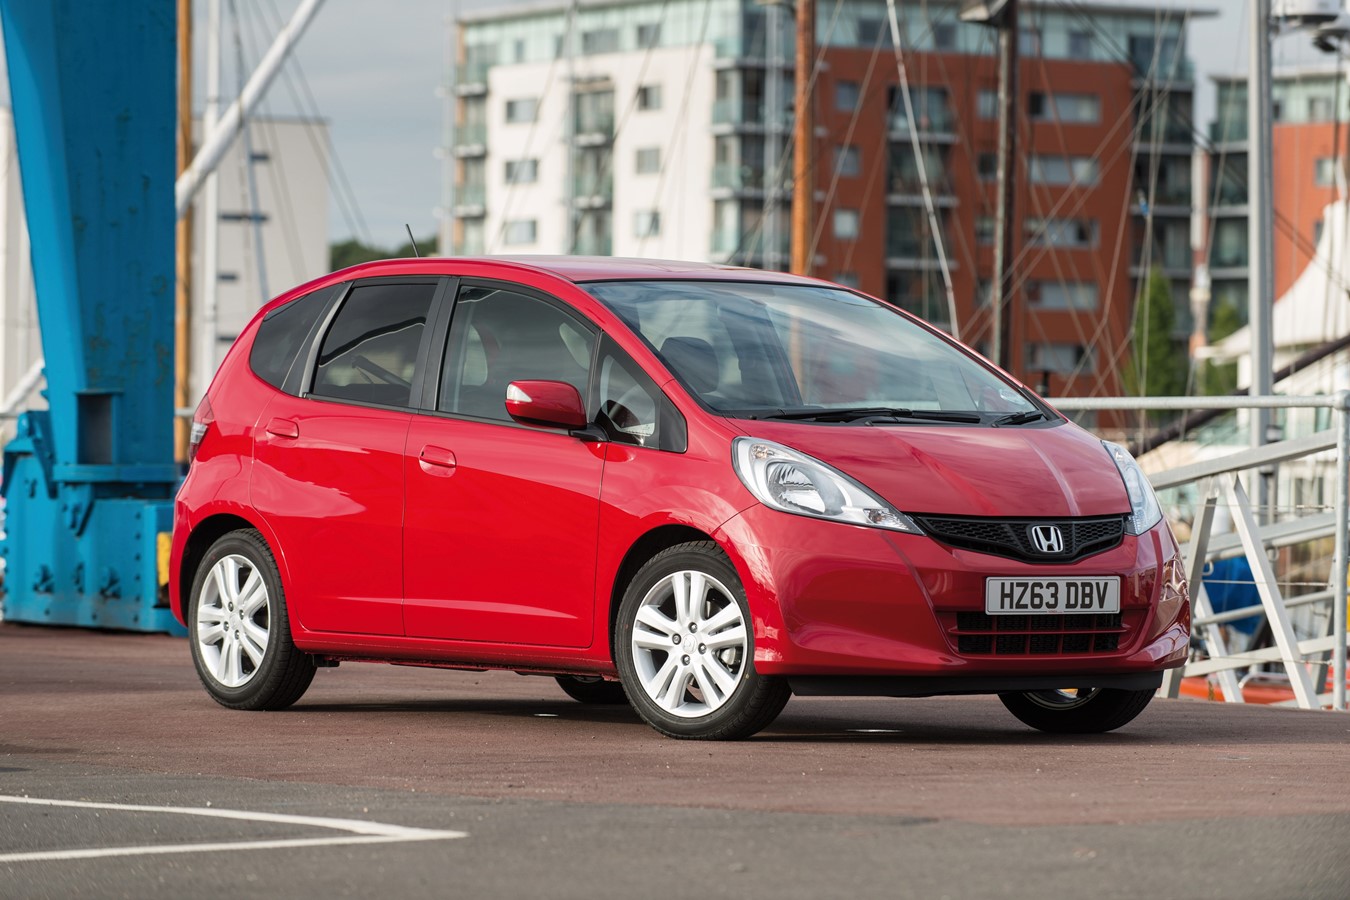 Honda Jazz Crowned Most Reliable Car in 2014 Auto Express Driver Power Survey 